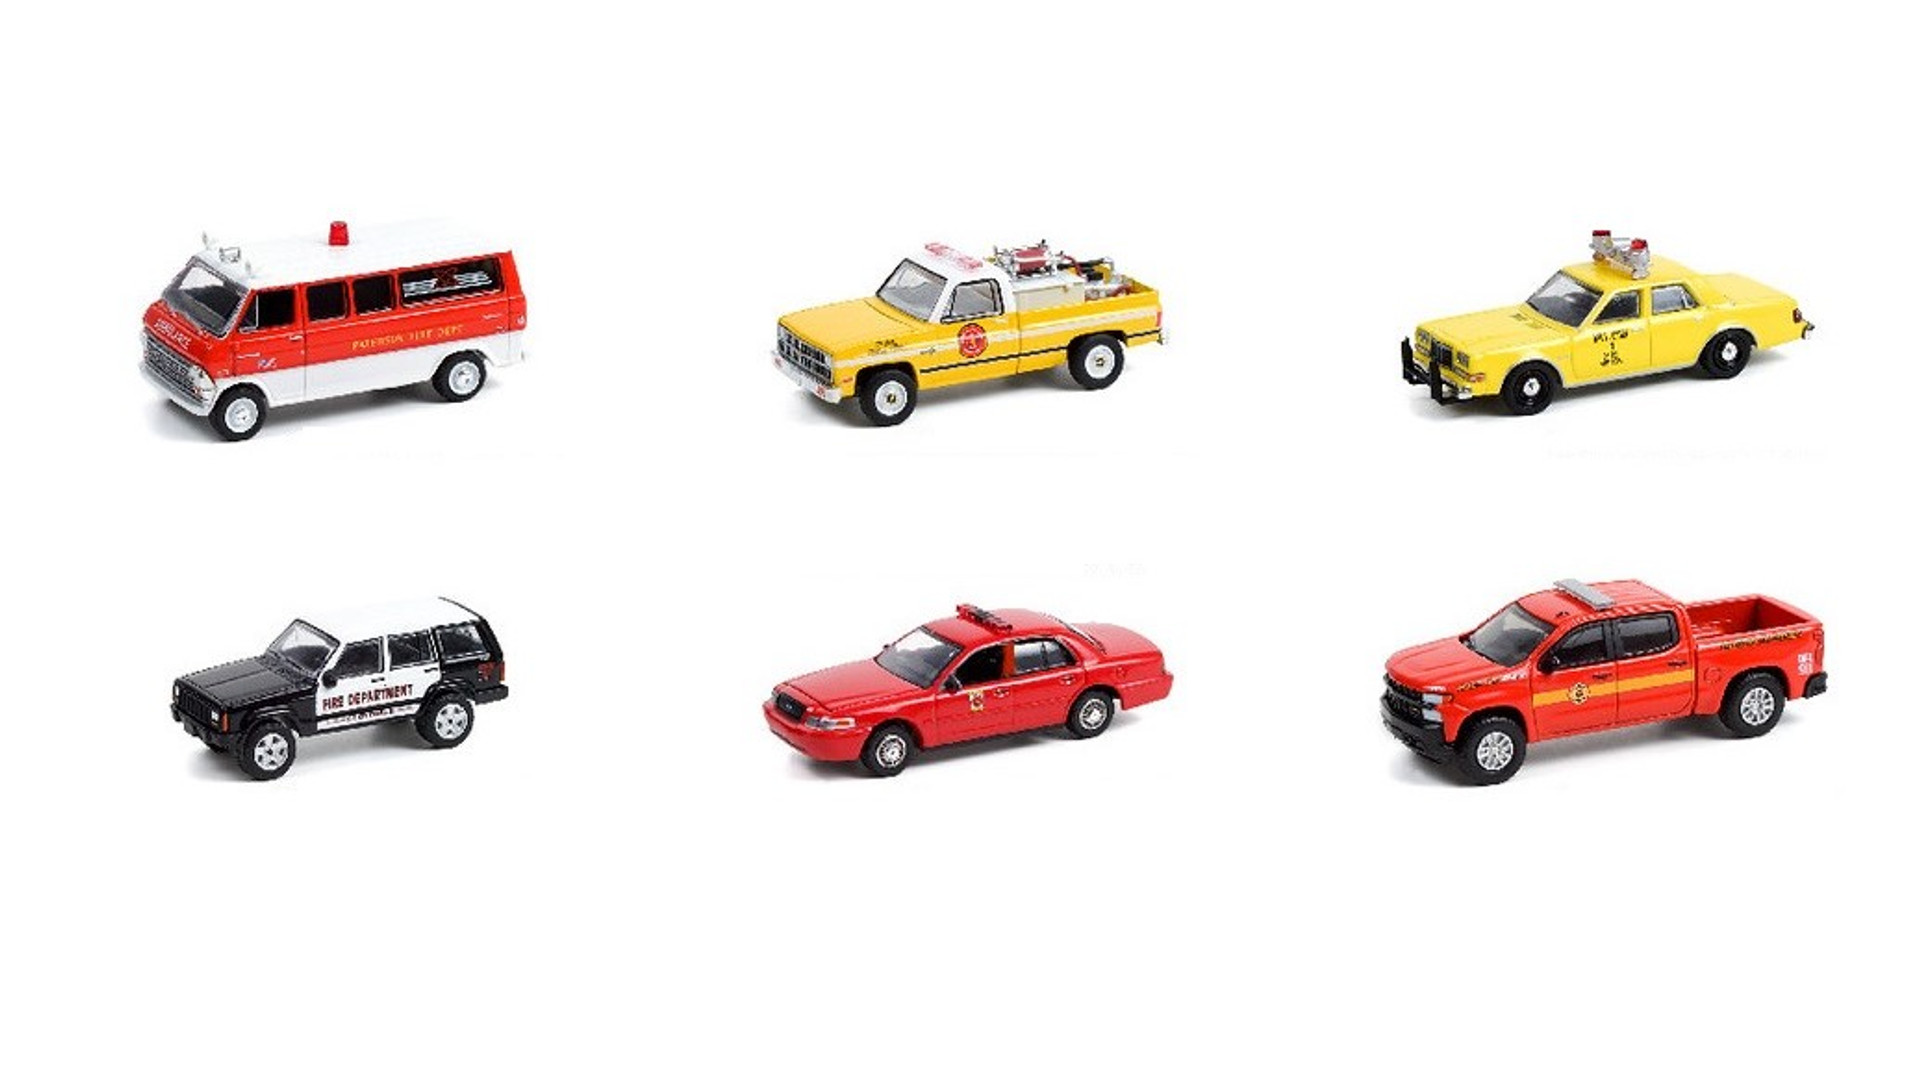 Greenlight Fire & Rescue Series 2 Diecast Car Set - Box of 6 assorted 1 ...